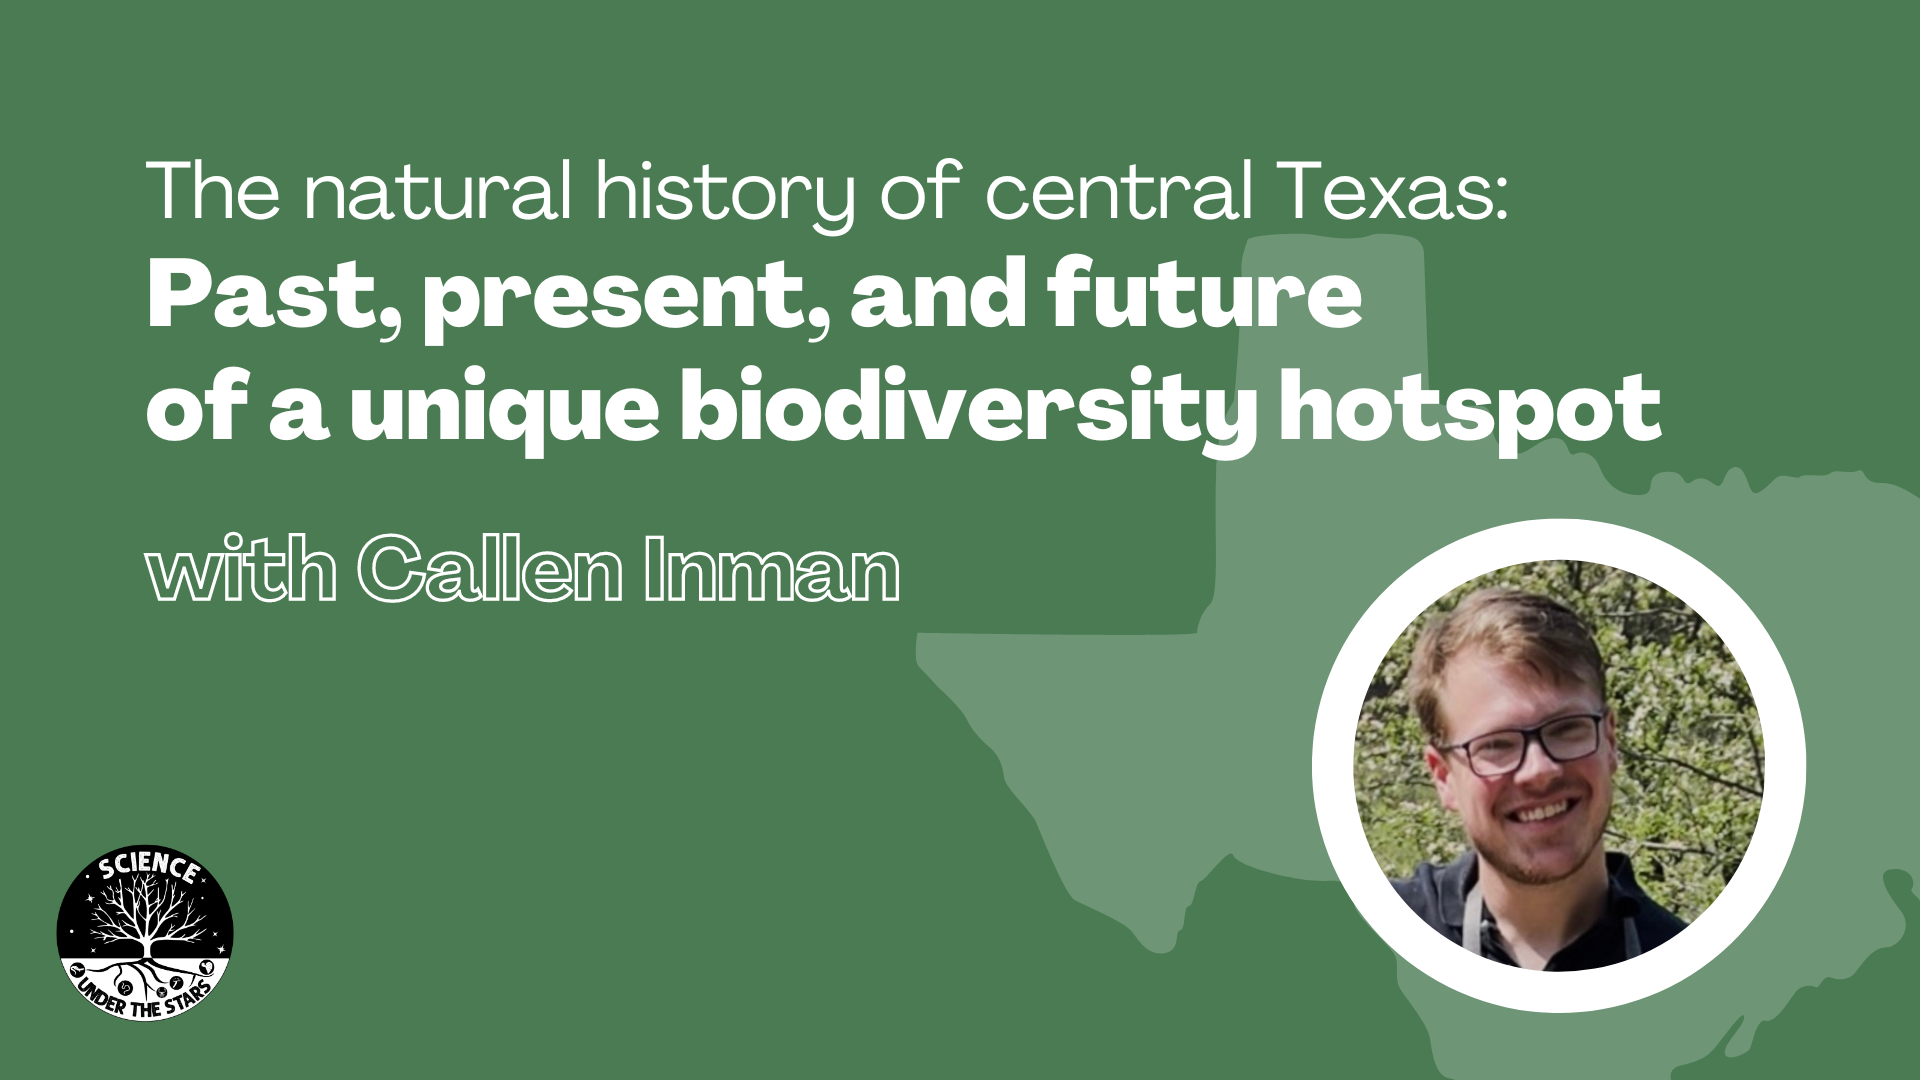 The natural history of central Texas: Past, present, and future of a unique biodiversity hotspot with Callen Inman